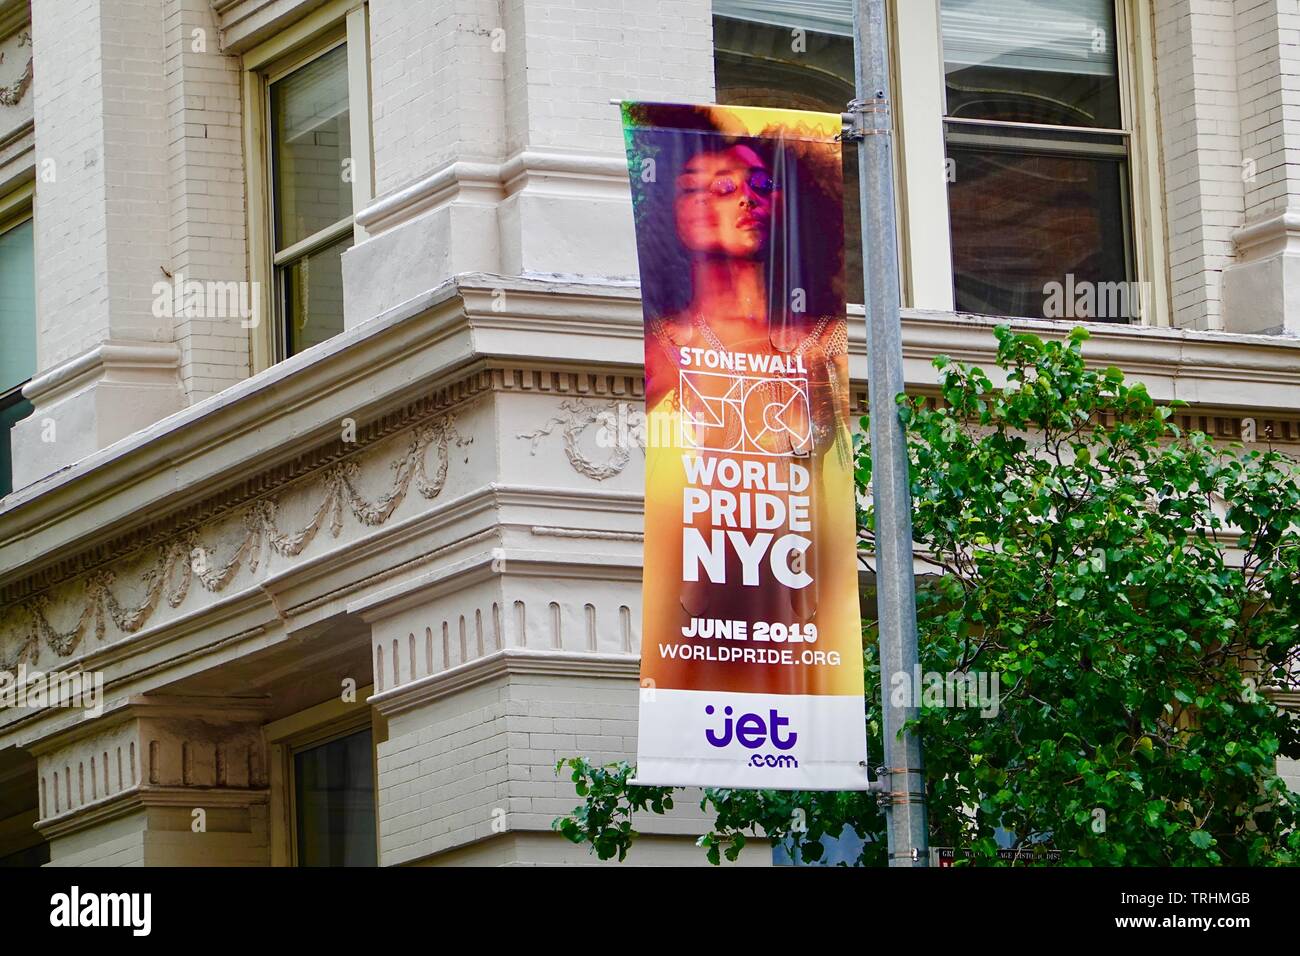 World Pride NYC June 2019 banner in Greenwich Village, New York, NY, USA Stock Photo